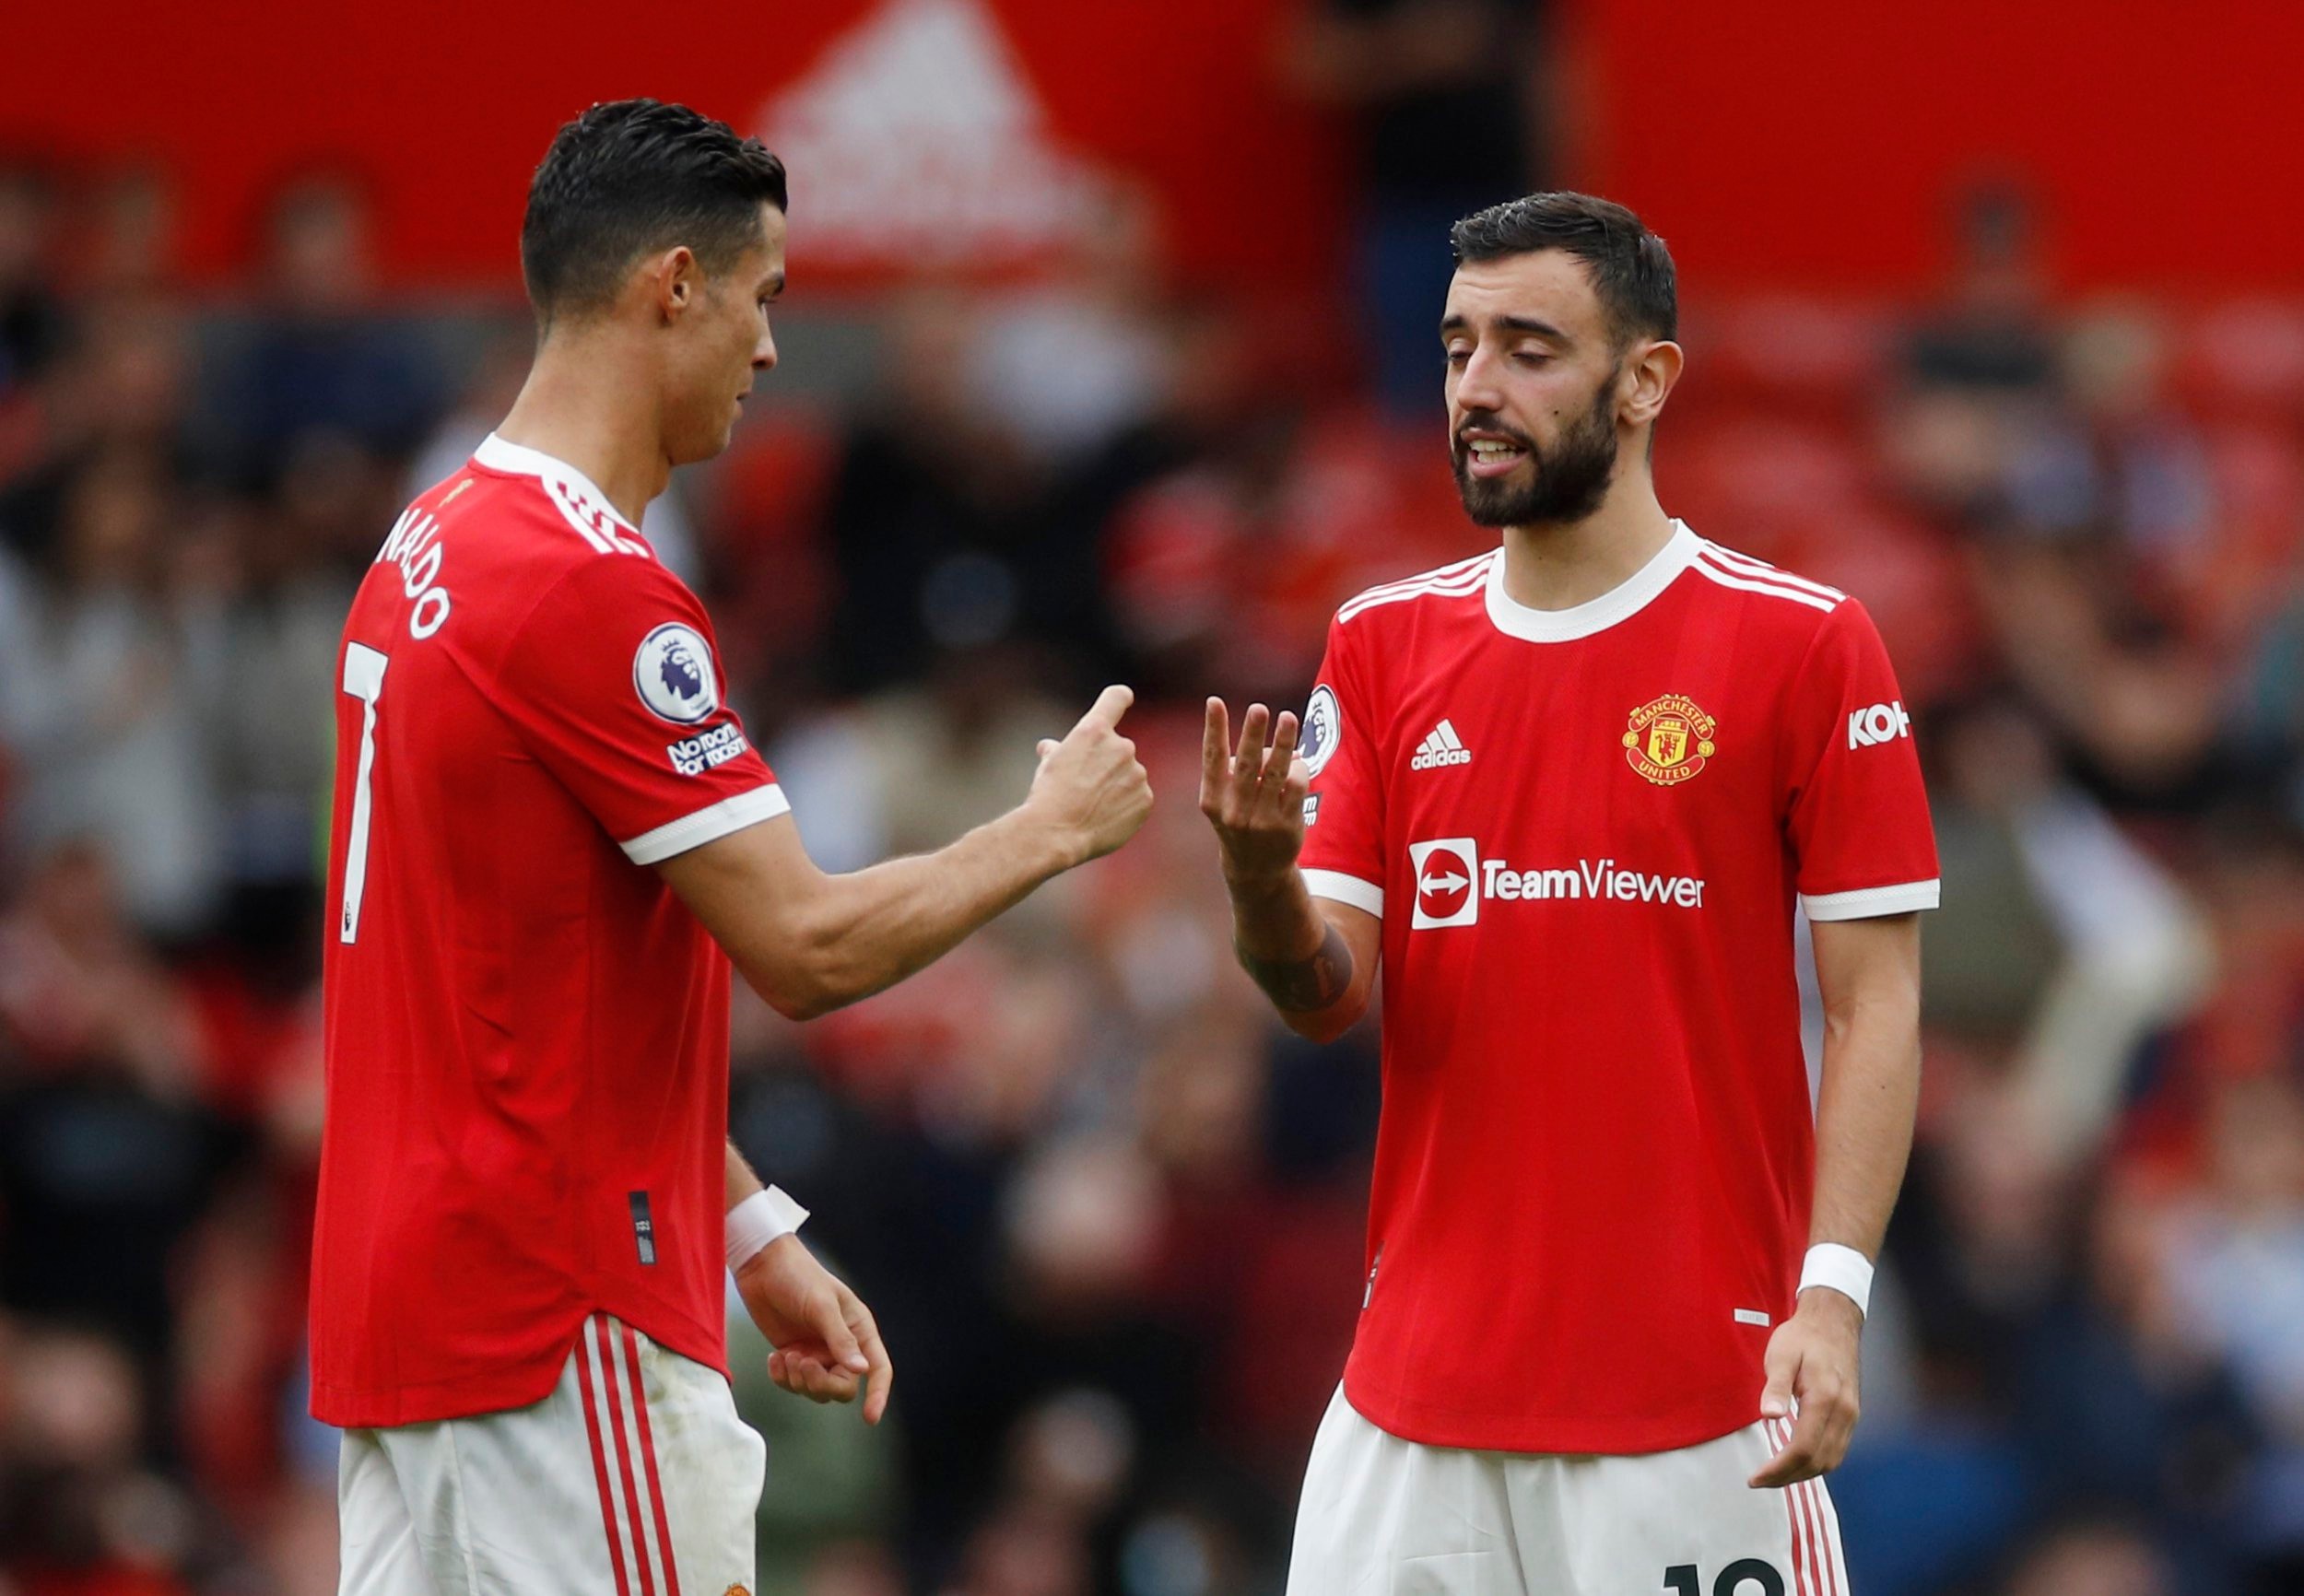 Ole Gunnar Solskjaer responds to calls for Cristiano Ronaldo to take Manchester United’s penalties after Bruno Fernandes’ miss